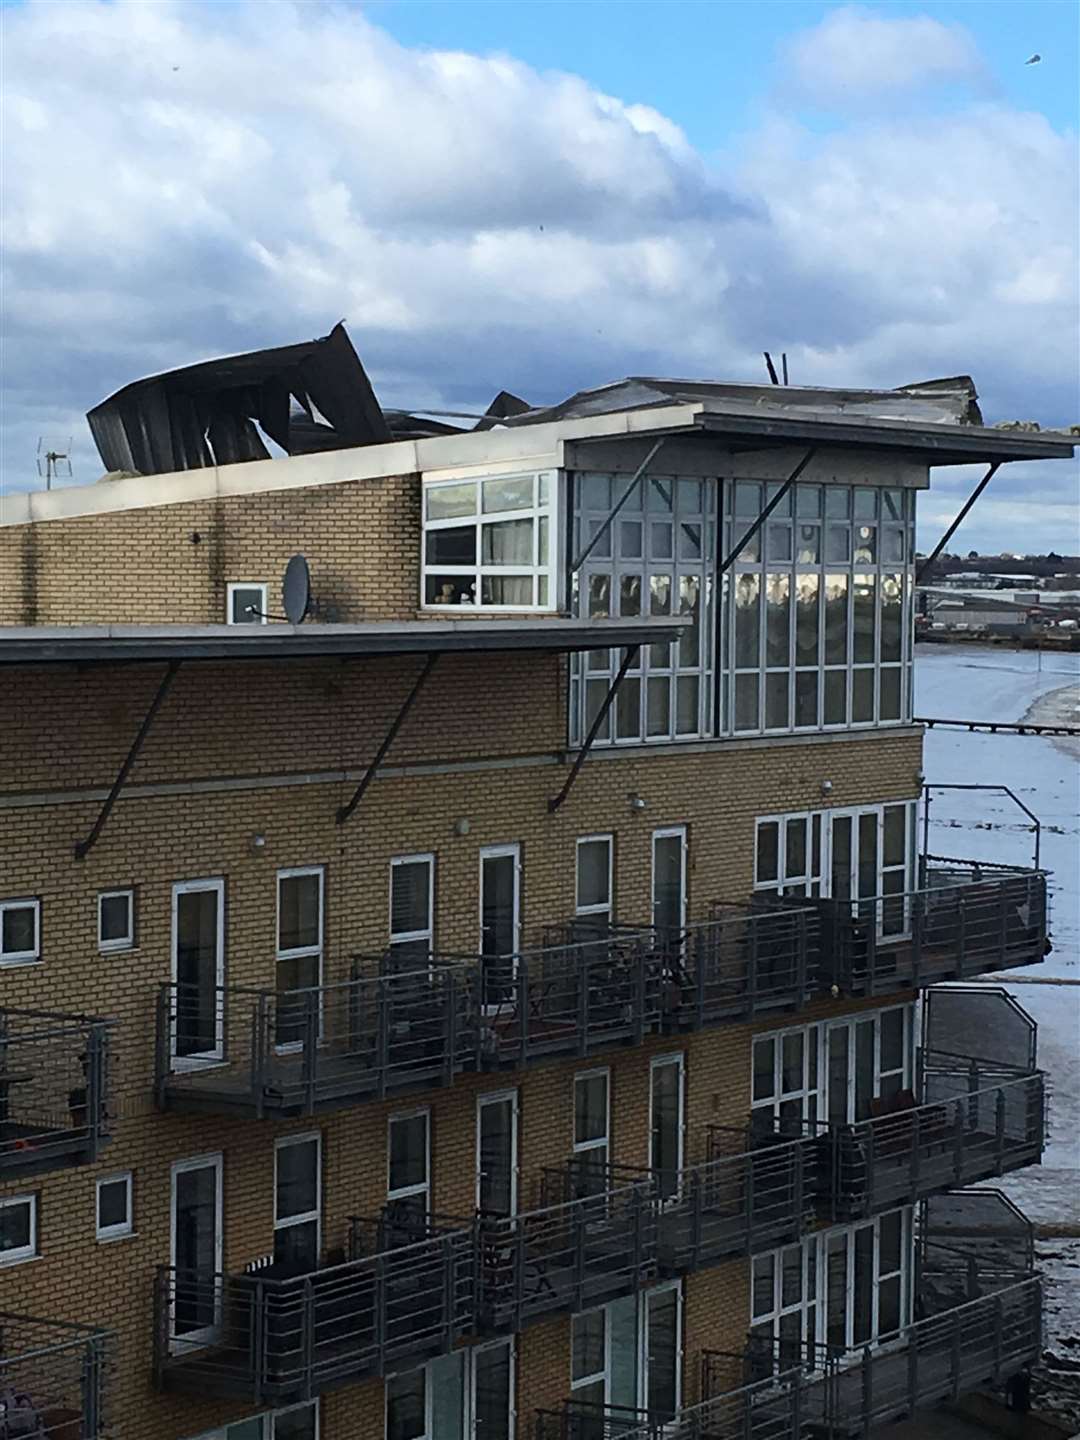 High winds caused damage to the roof of Alderman House in Greenhithe (7676281). Picture by Rob J Bradley